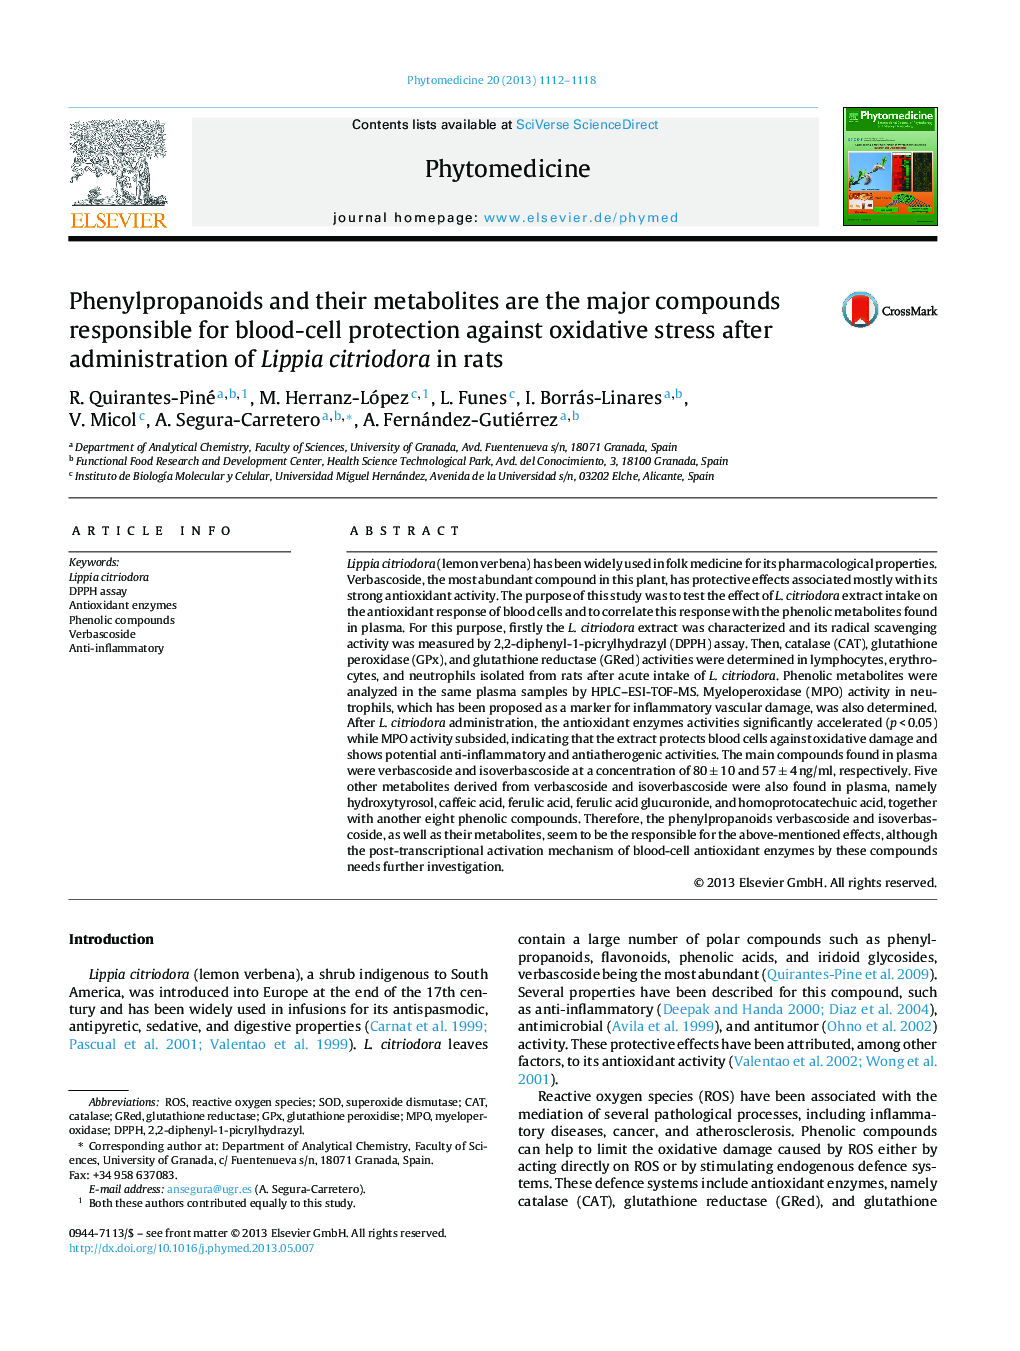 Phenylpropanoids and their metabolites are the major compounds responsible for blood-cell protection against oxidative stress after administration of Lippia citriodora in rats